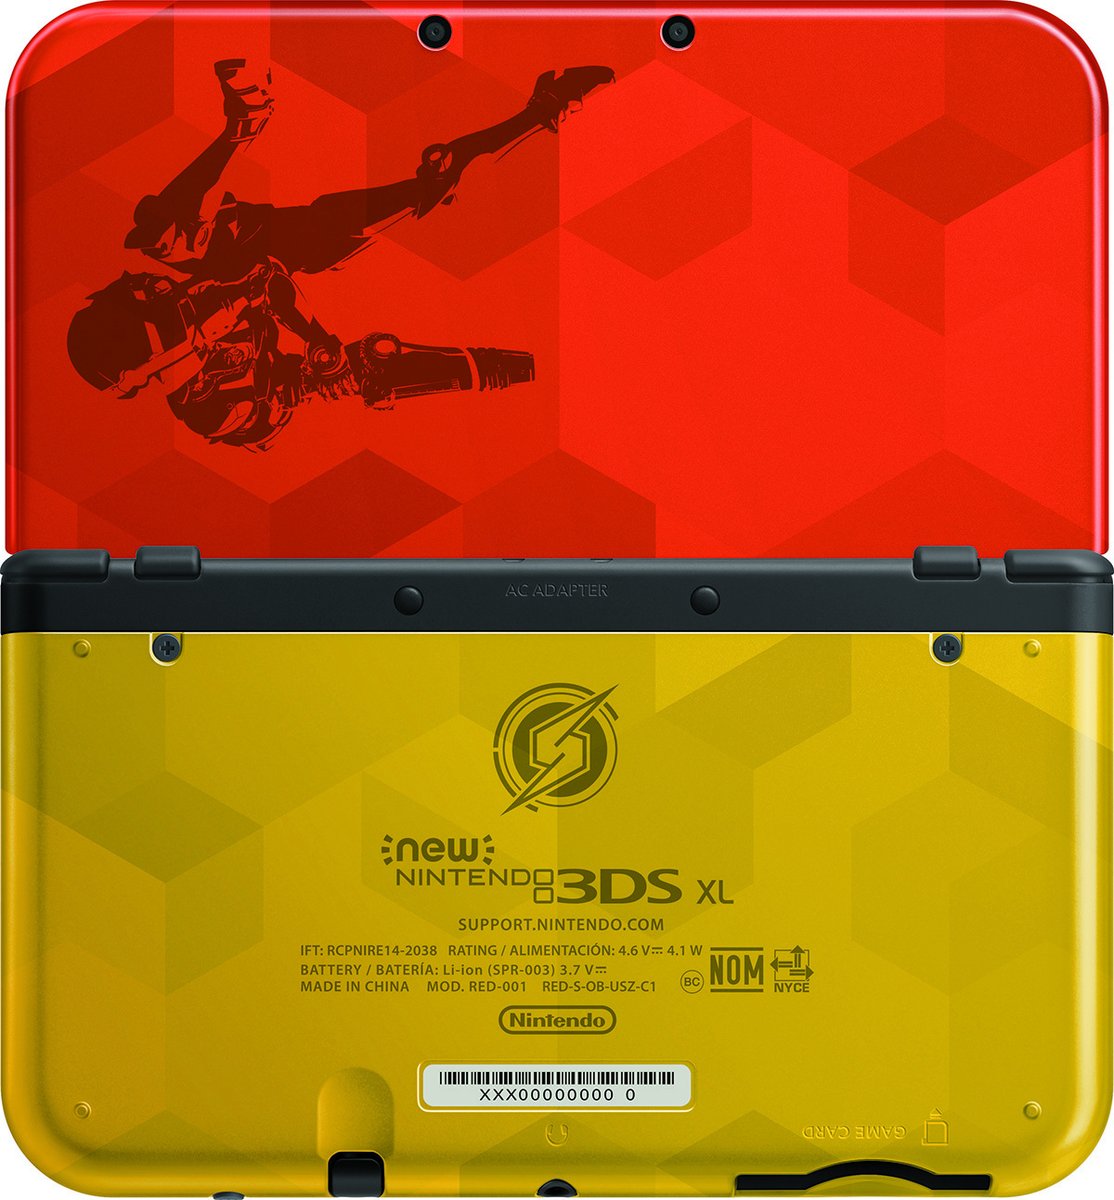 Nintendo Announces Metroid-Themed New Nintendo 3DS XL [Updated]